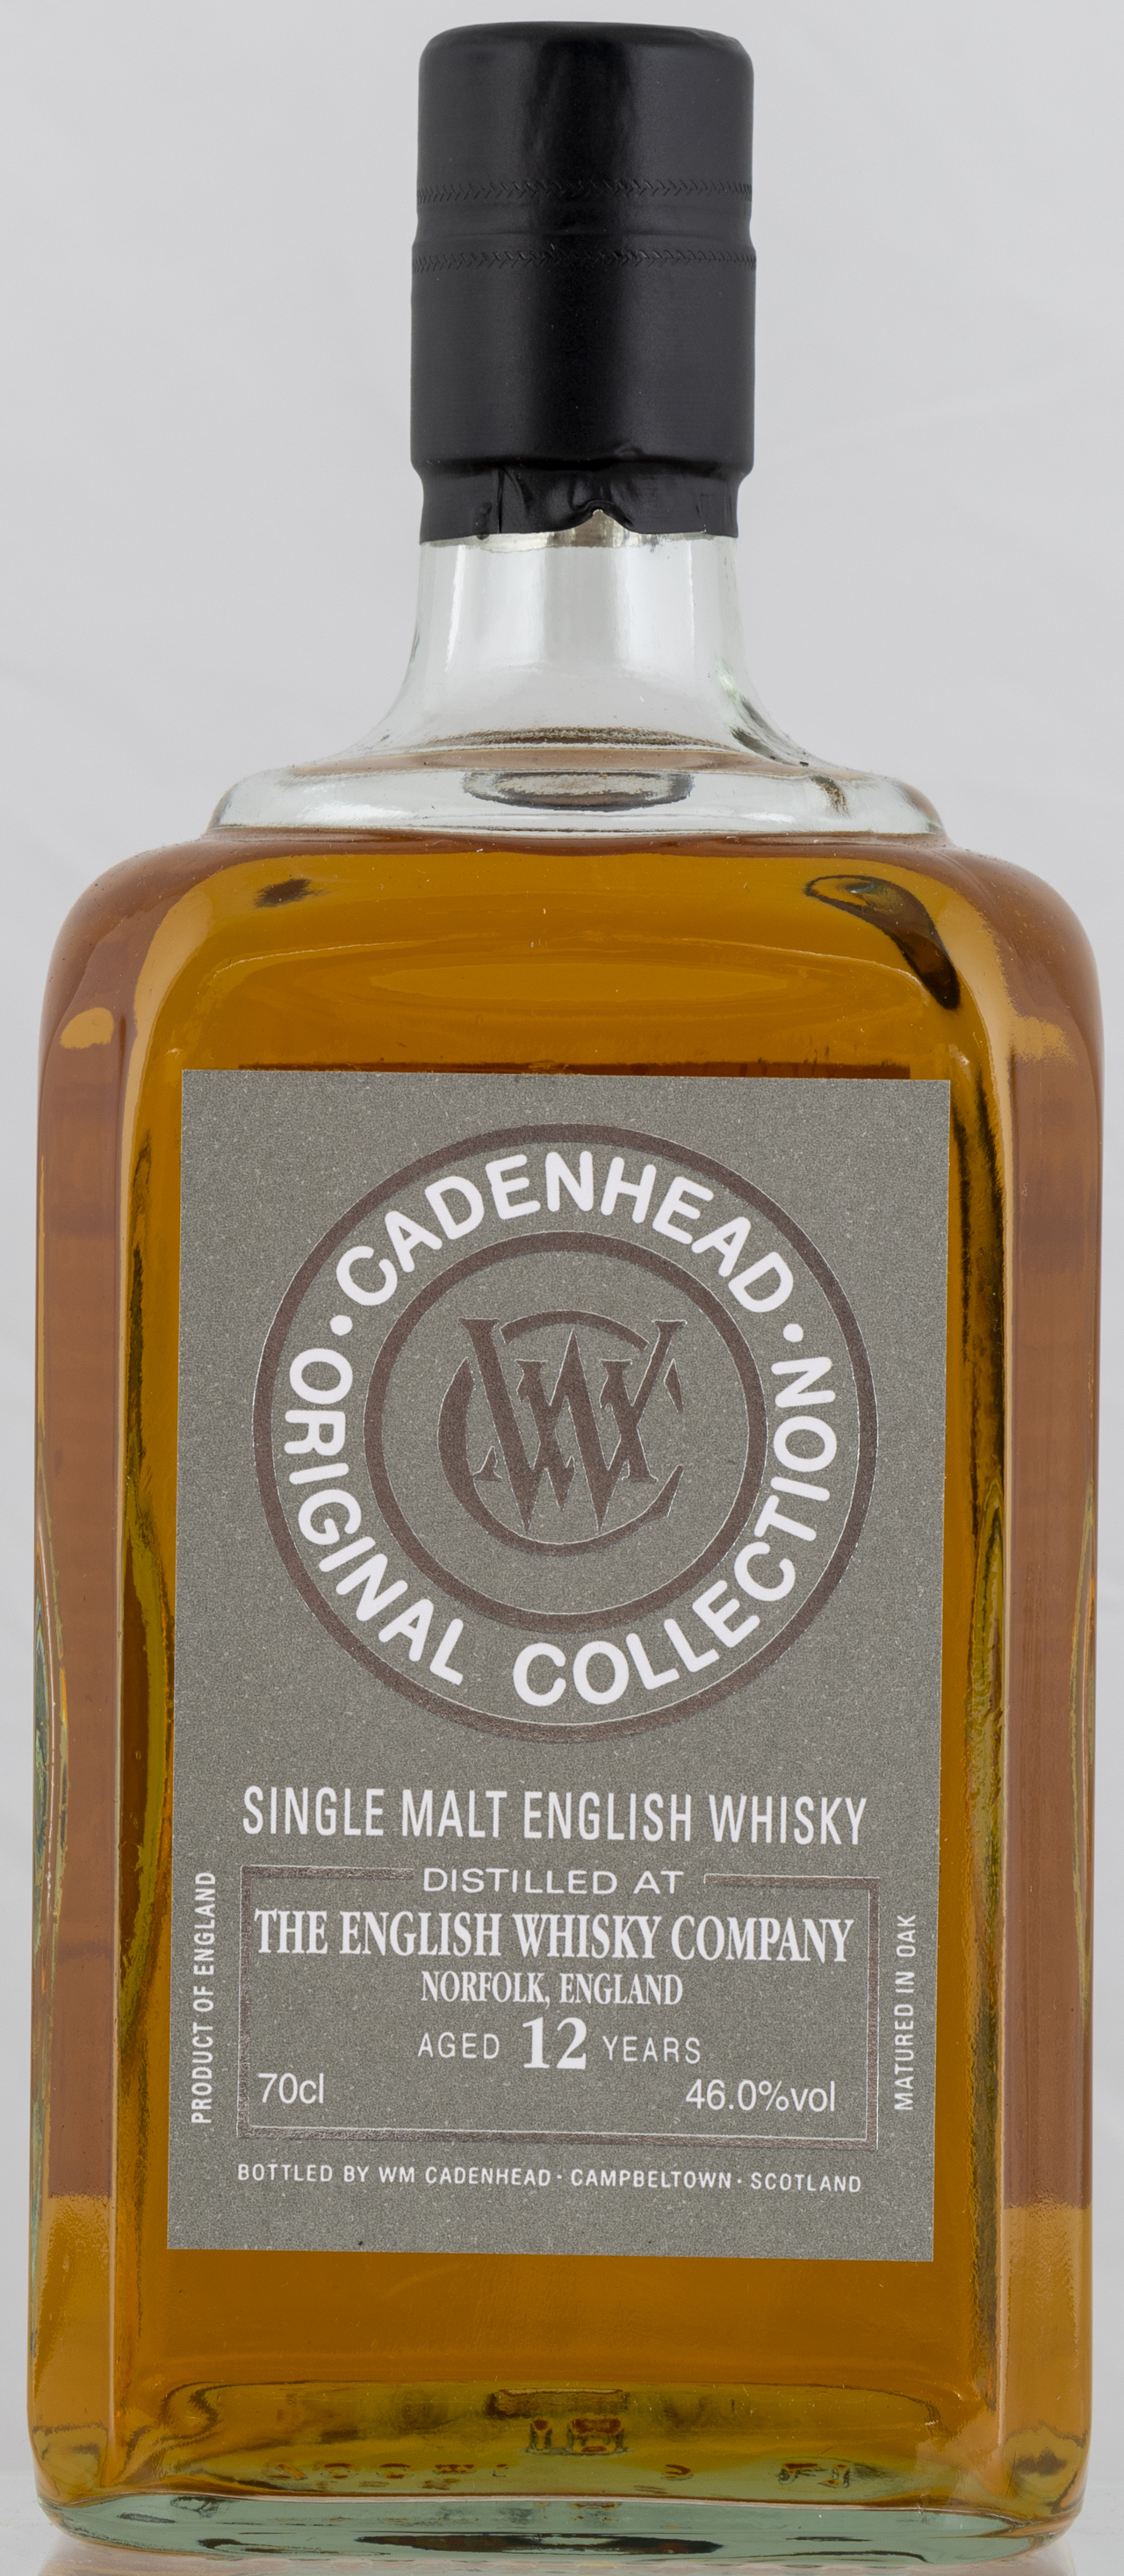 Billede: PHC_7270 - Cadenheads Original Collection The English Whisky Company 12 - bottle front.jpg